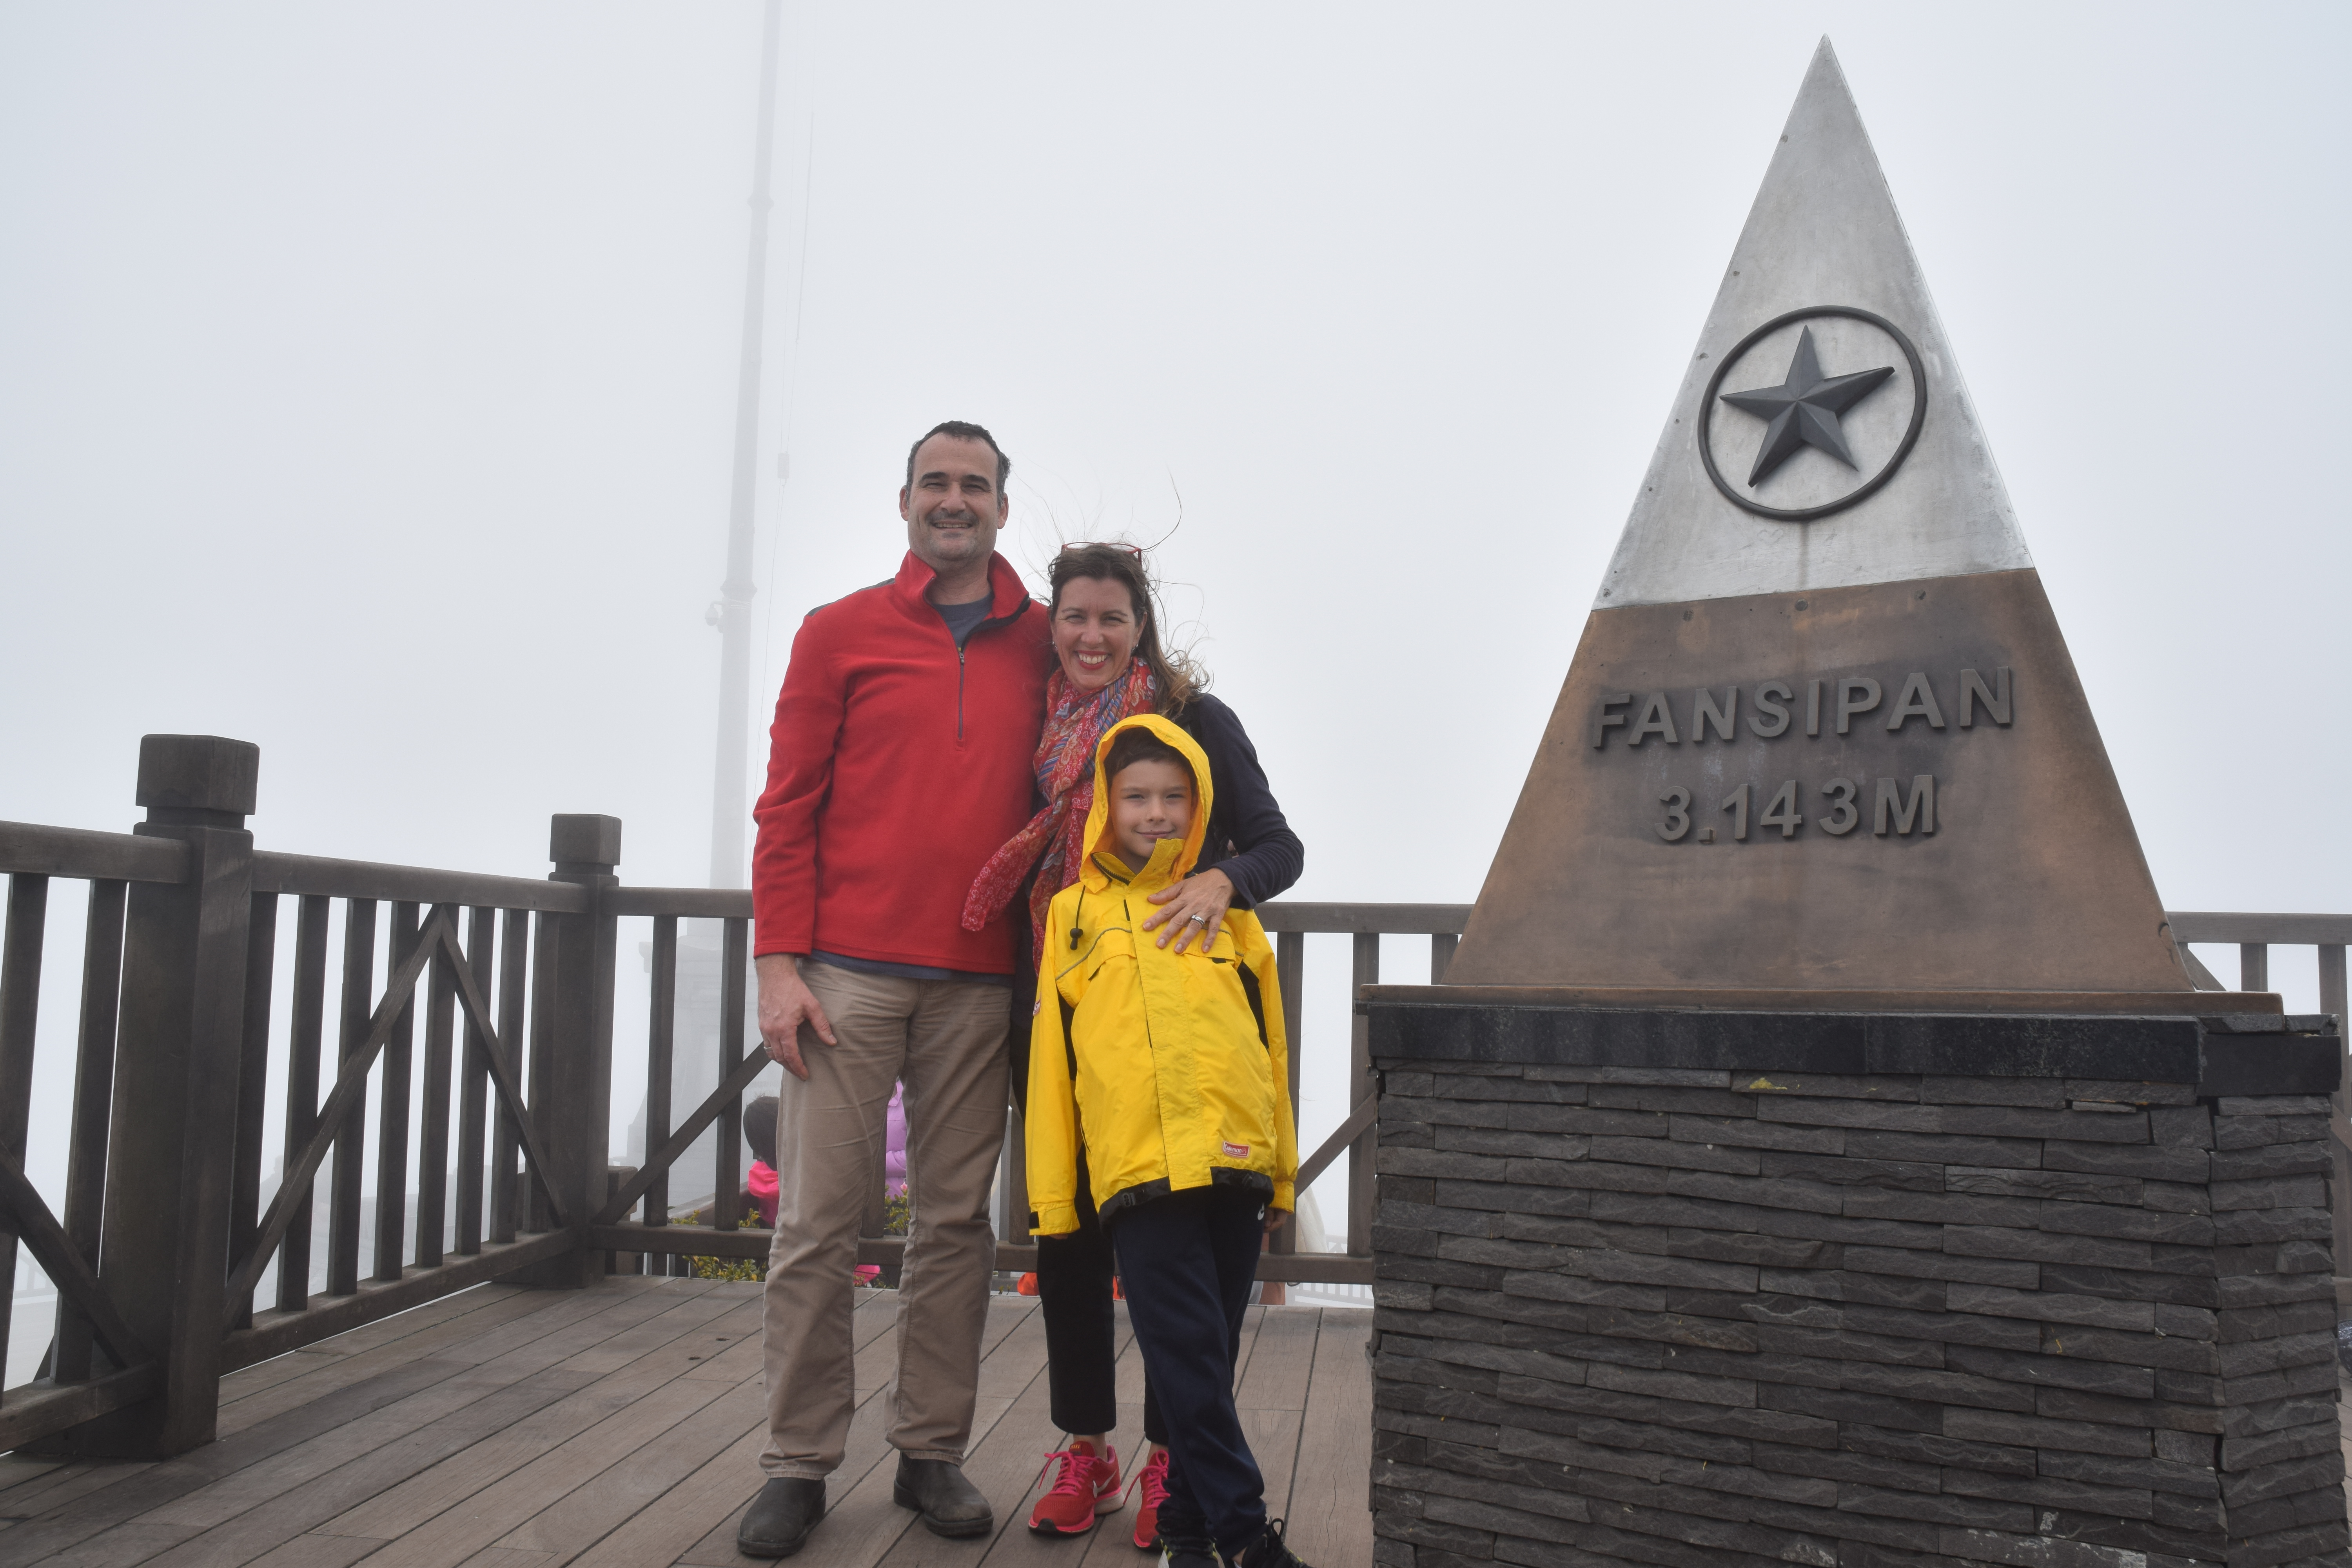 Kyle Nunas and his family during a trip to Fansipan mountain in Sa Pa, a famous resort town in the northern Vietnamese province of Lao Cai, in 2018. Photo: Supplied